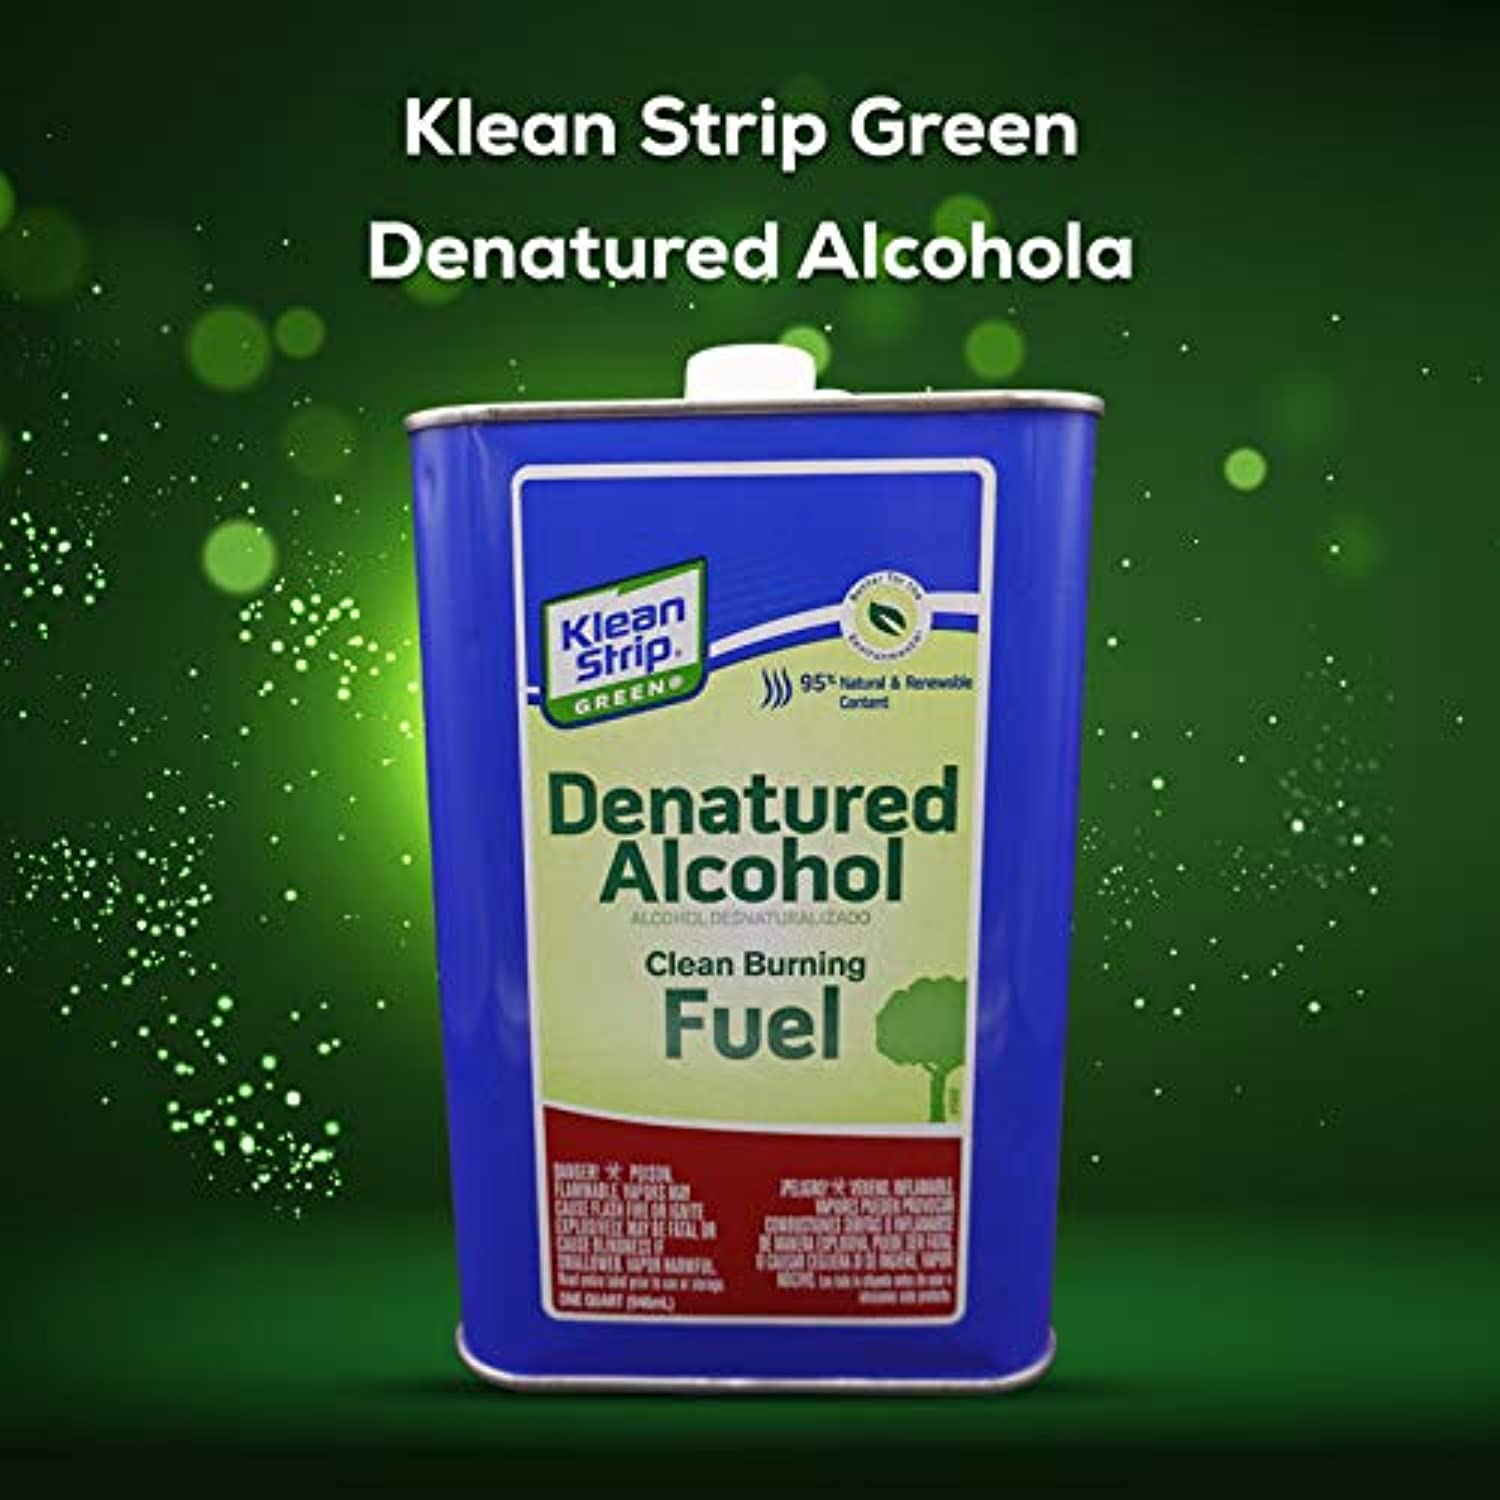 Centaurus AZ Klean Strip Green Denatured Alcohol Expandable Funnel, Odorless, Smokeless Flames, Cleans Burning, 95% Natural, Ideal for Marine Stoves and Other Alcohol-Burning Appliances- 1 Qt (1)